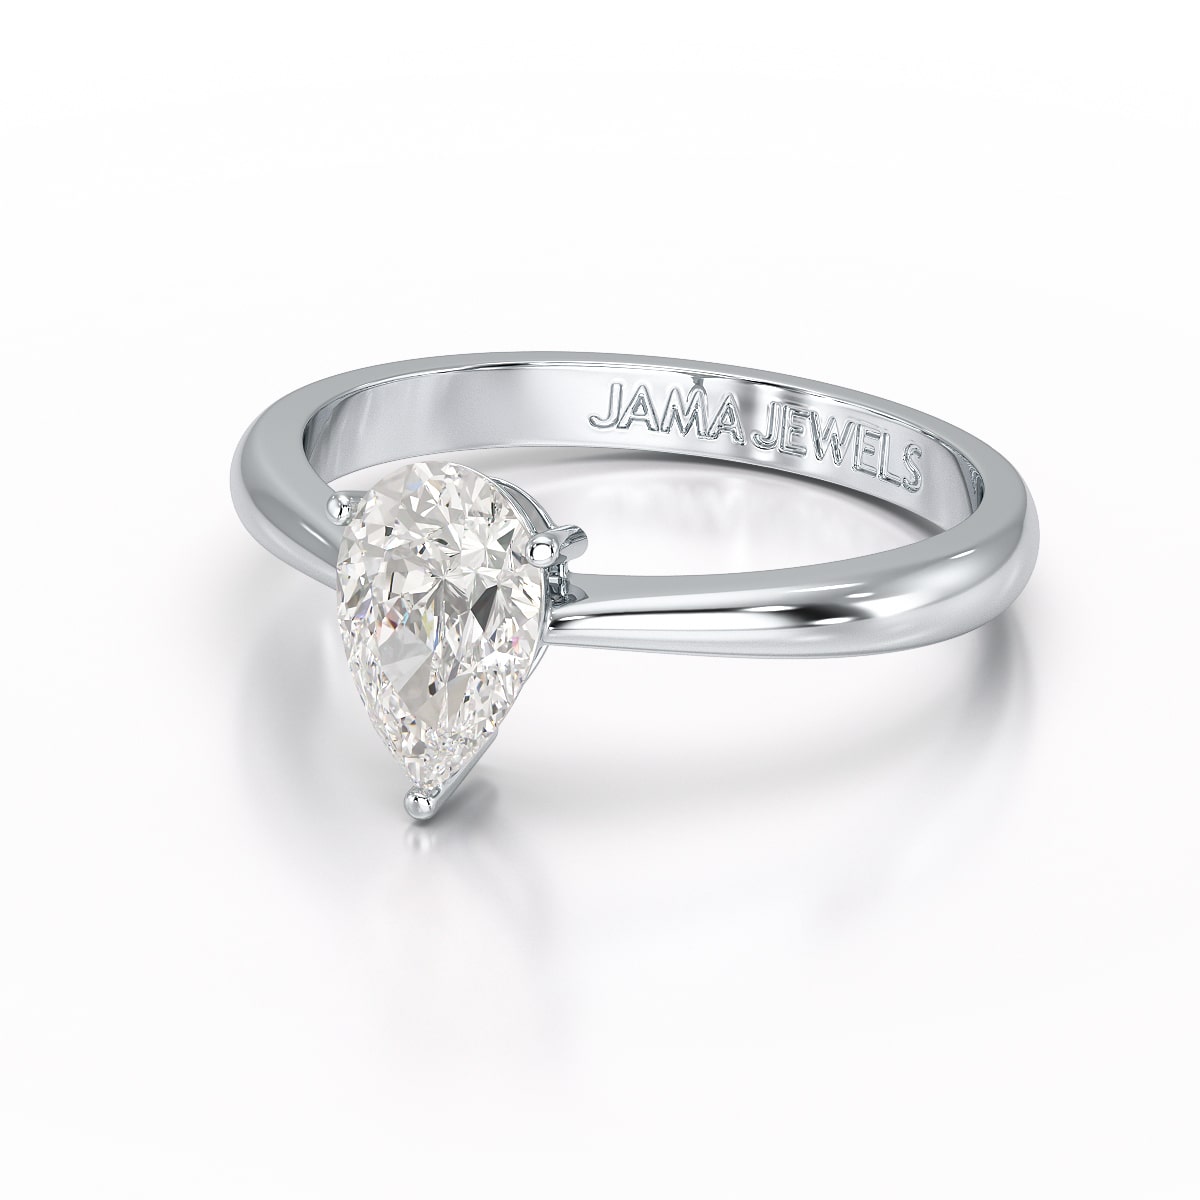 1 Ct Solitaire Pear Shape Lab Diamond Ring